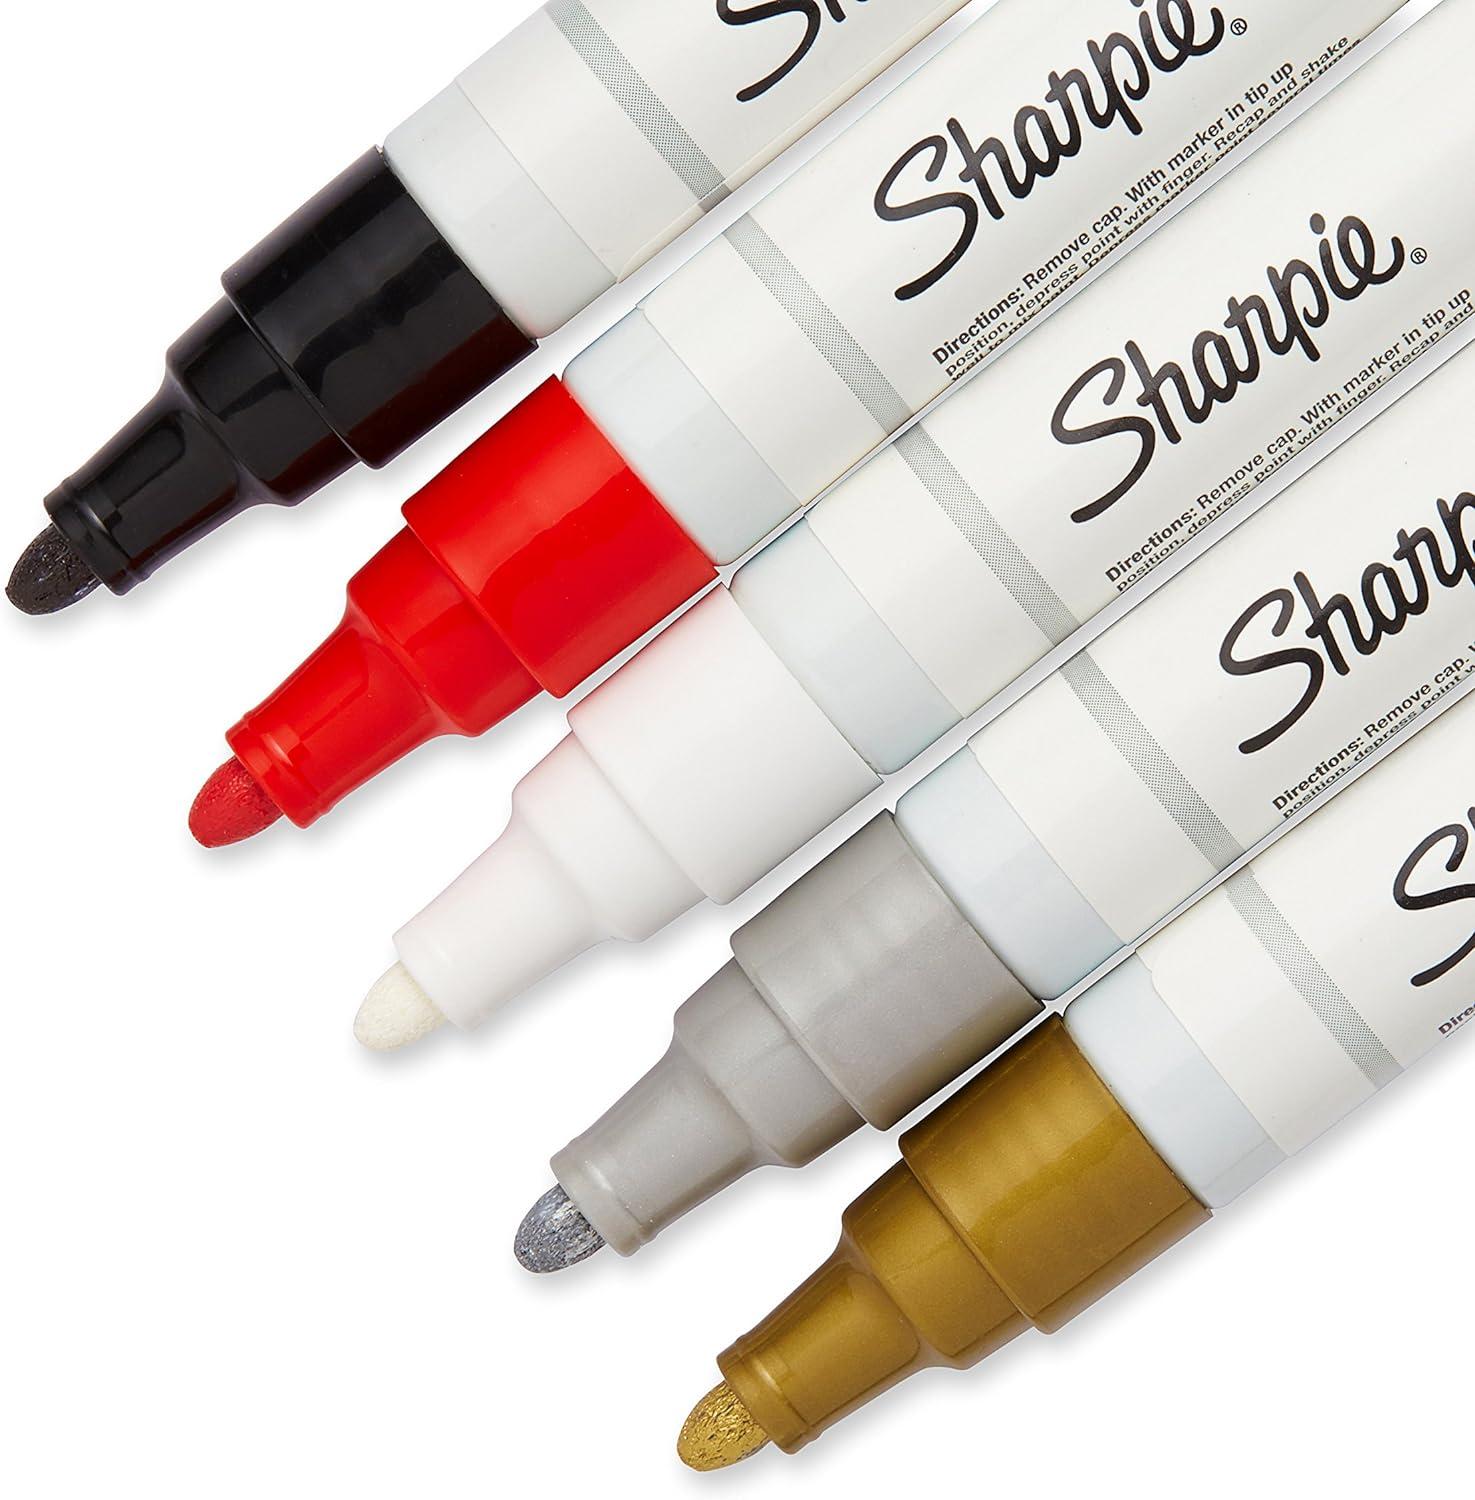  Sharpie Water-Based Paint Markers, Extra-Fine, Assorted  Colors, 5 Count : Permanent Markers : Arts, Crafts & Sewing